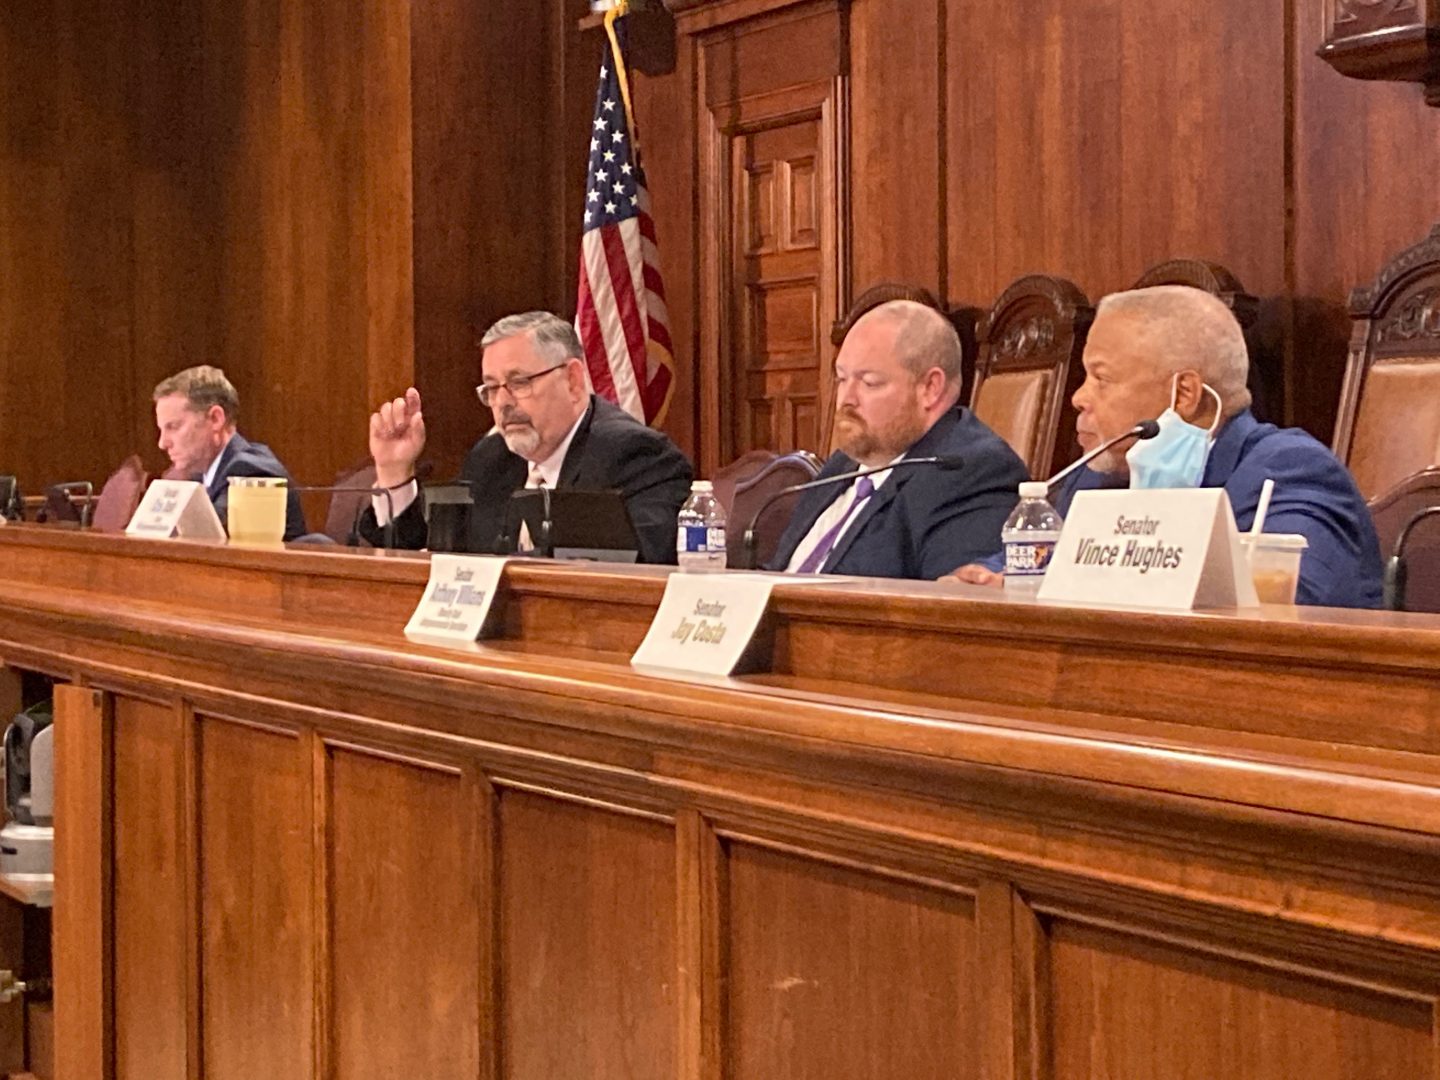 Sen. Cris Dush (R-Cameron), second from left, responds to questions raised by Sen. Anthony Williams (D-Delaware), right, during a state Senate Intergovernmental Operations Committee hearing on investigating the 2020 and 2021 elections on Sept. 9, 2021.